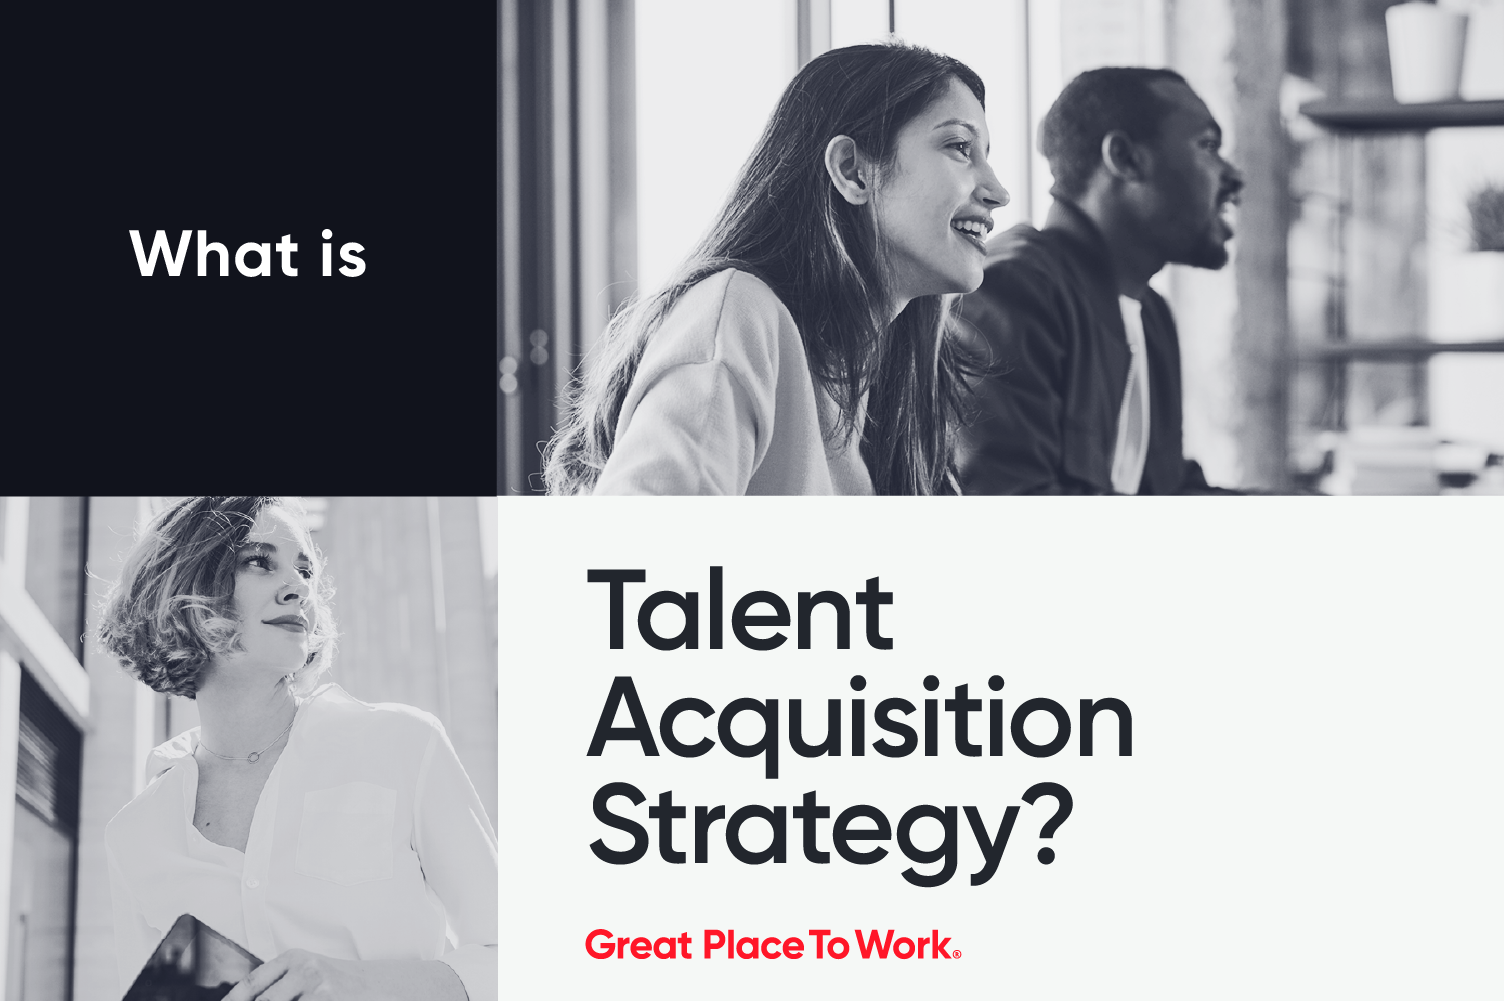  Talent acquisition strategy is depicted with a designed graphic with black and white photography and text reading 